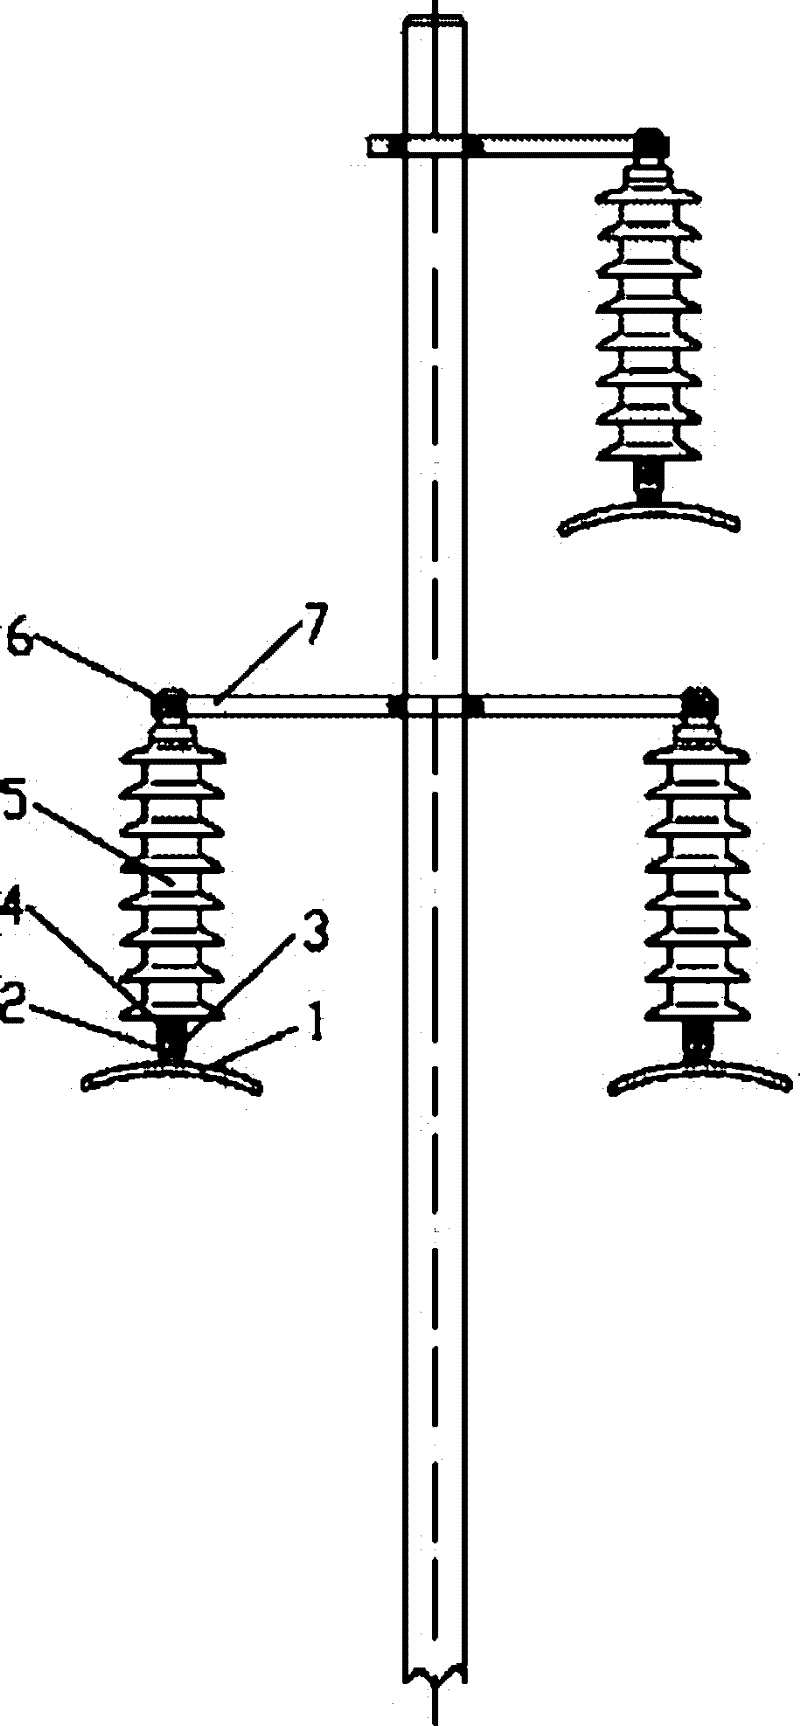 Lightning protection device for contactless power transmission and distribution line